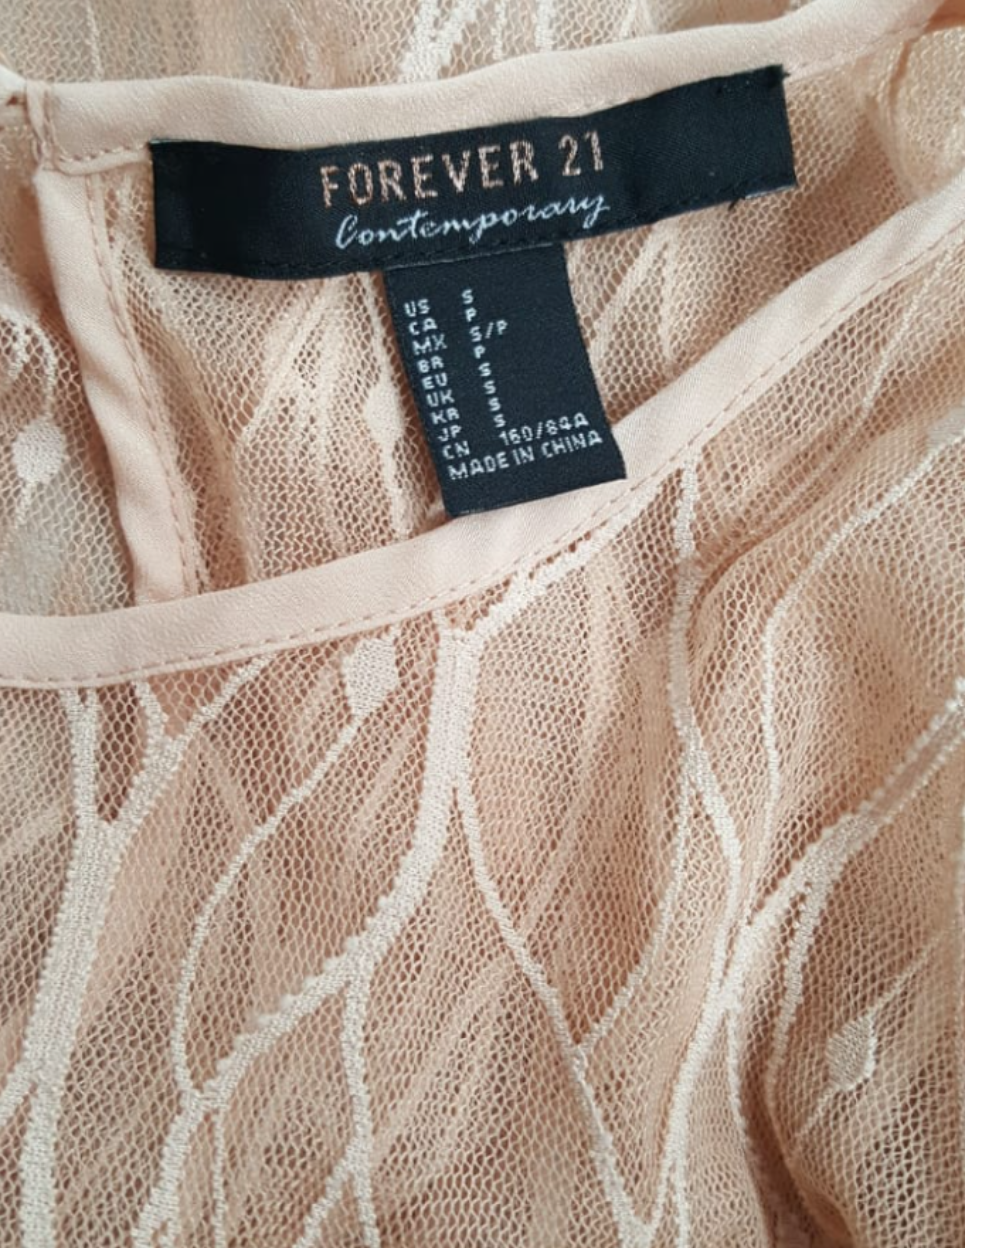 Blusas Casuales Forever 21